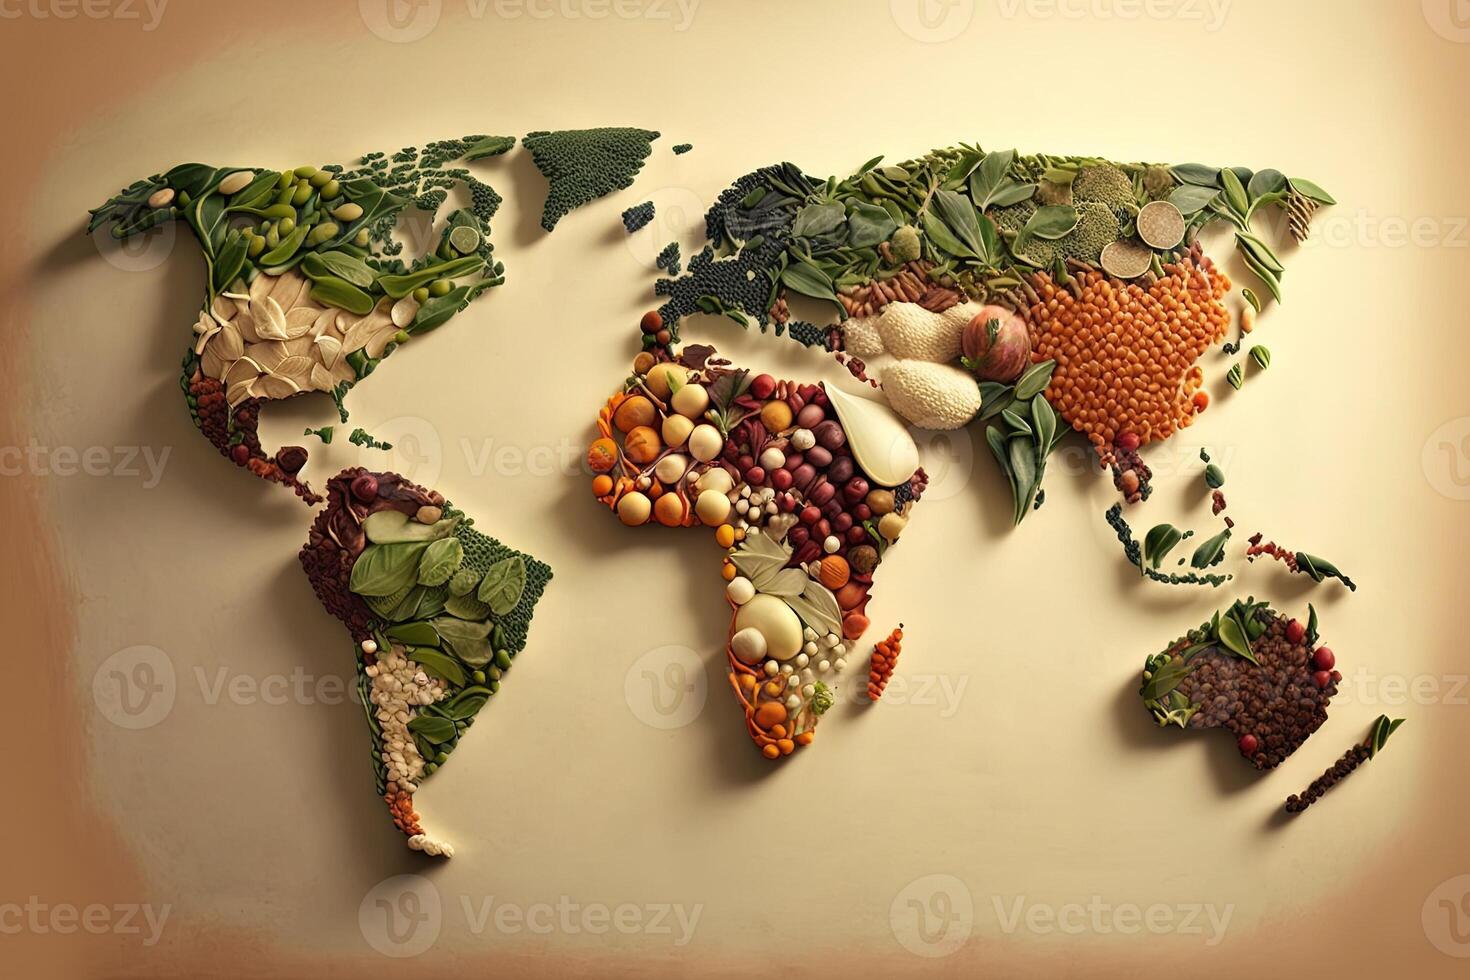 World map made of fresh vegatables Creative diet food healthy eating concept illustration photo